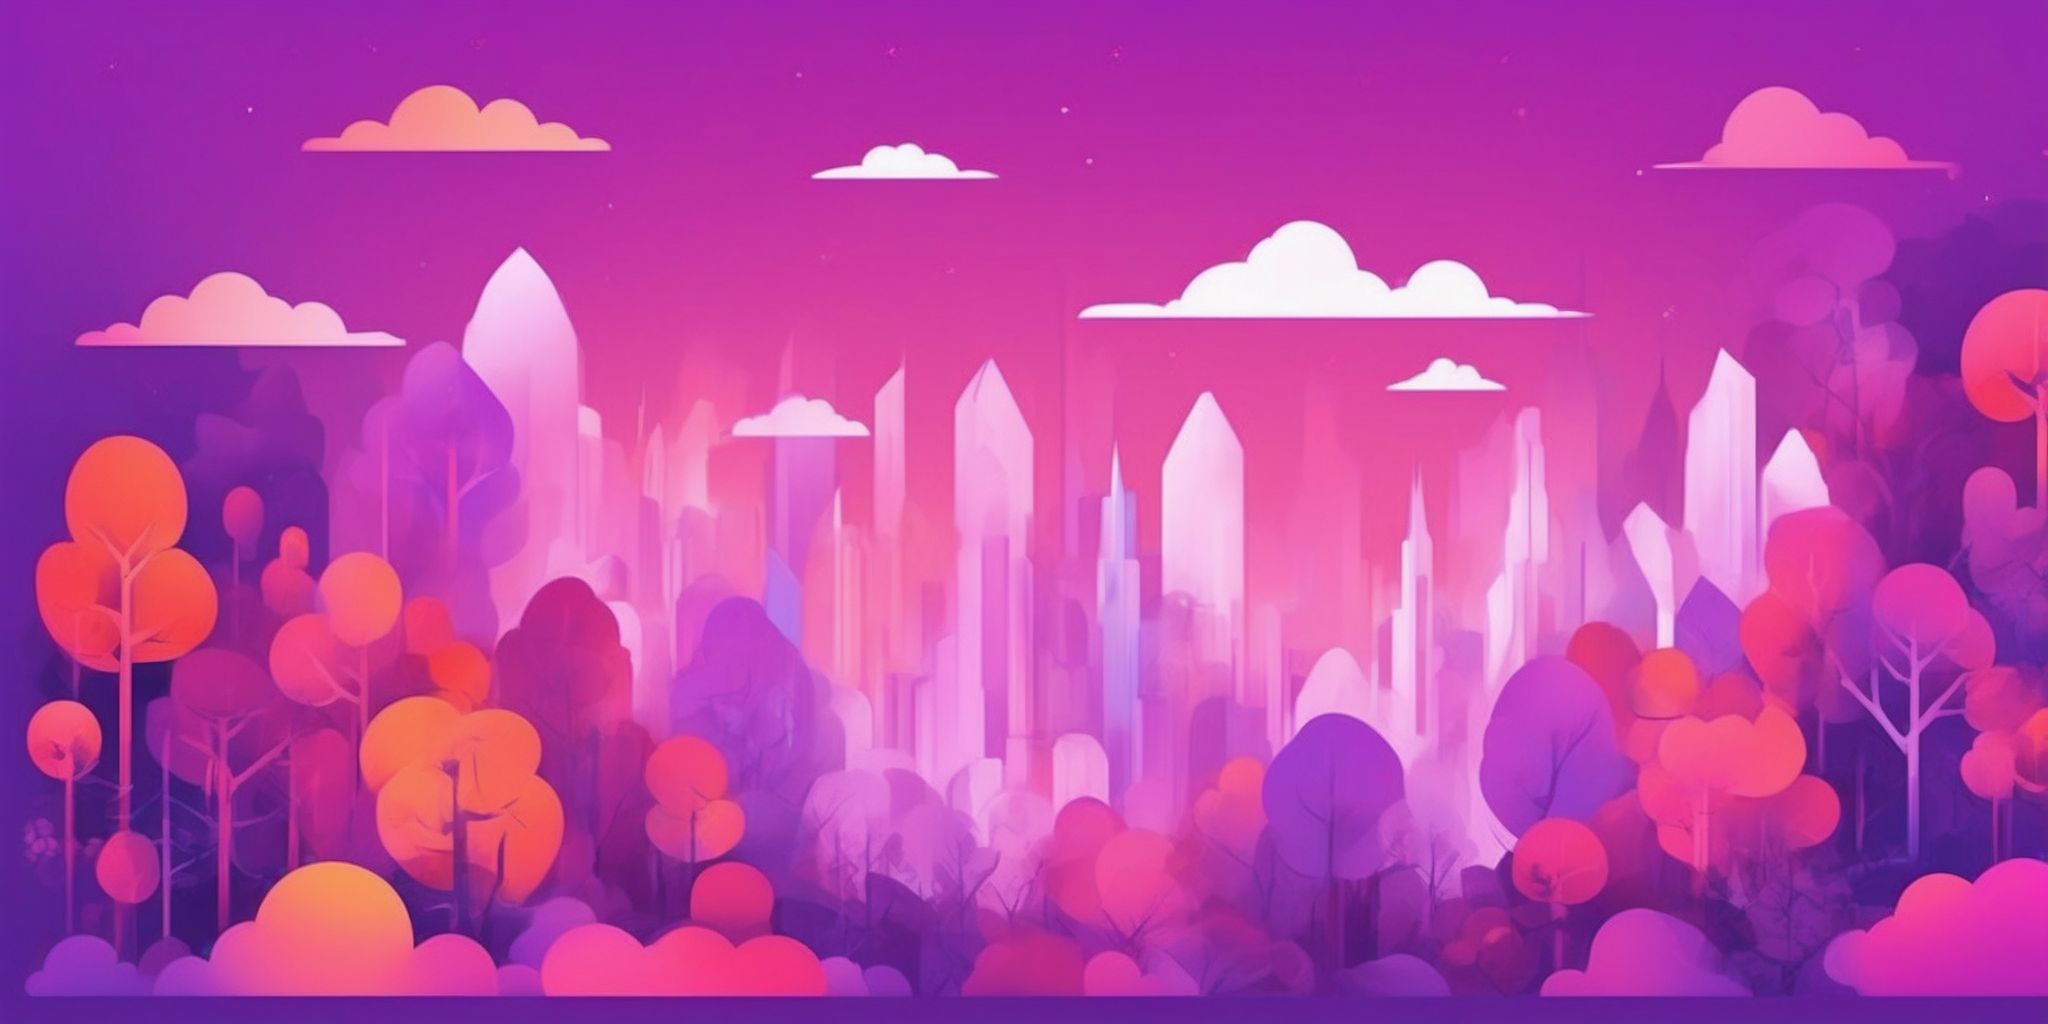 Keywords: in flat illustration style, colorful purple gradient colors